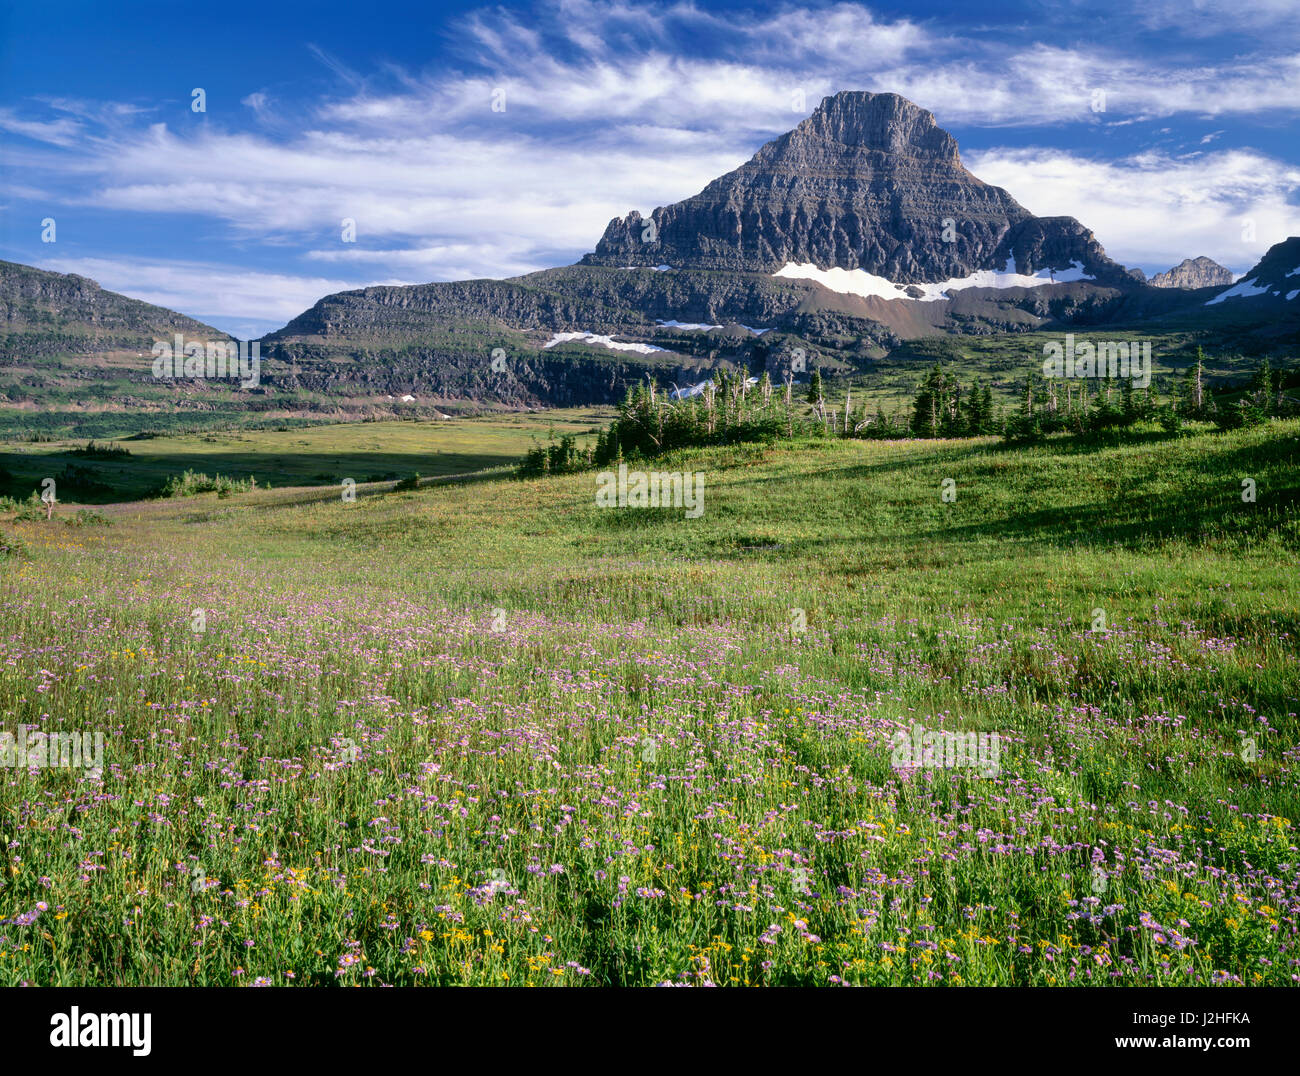 USA, Montana, Glacier National Park, Reynolds Mountain rises beyond wind-stunted conifers and meadow of showy fleabane and arnica near Logan Pass. (Large format sizes available) Stock Photo